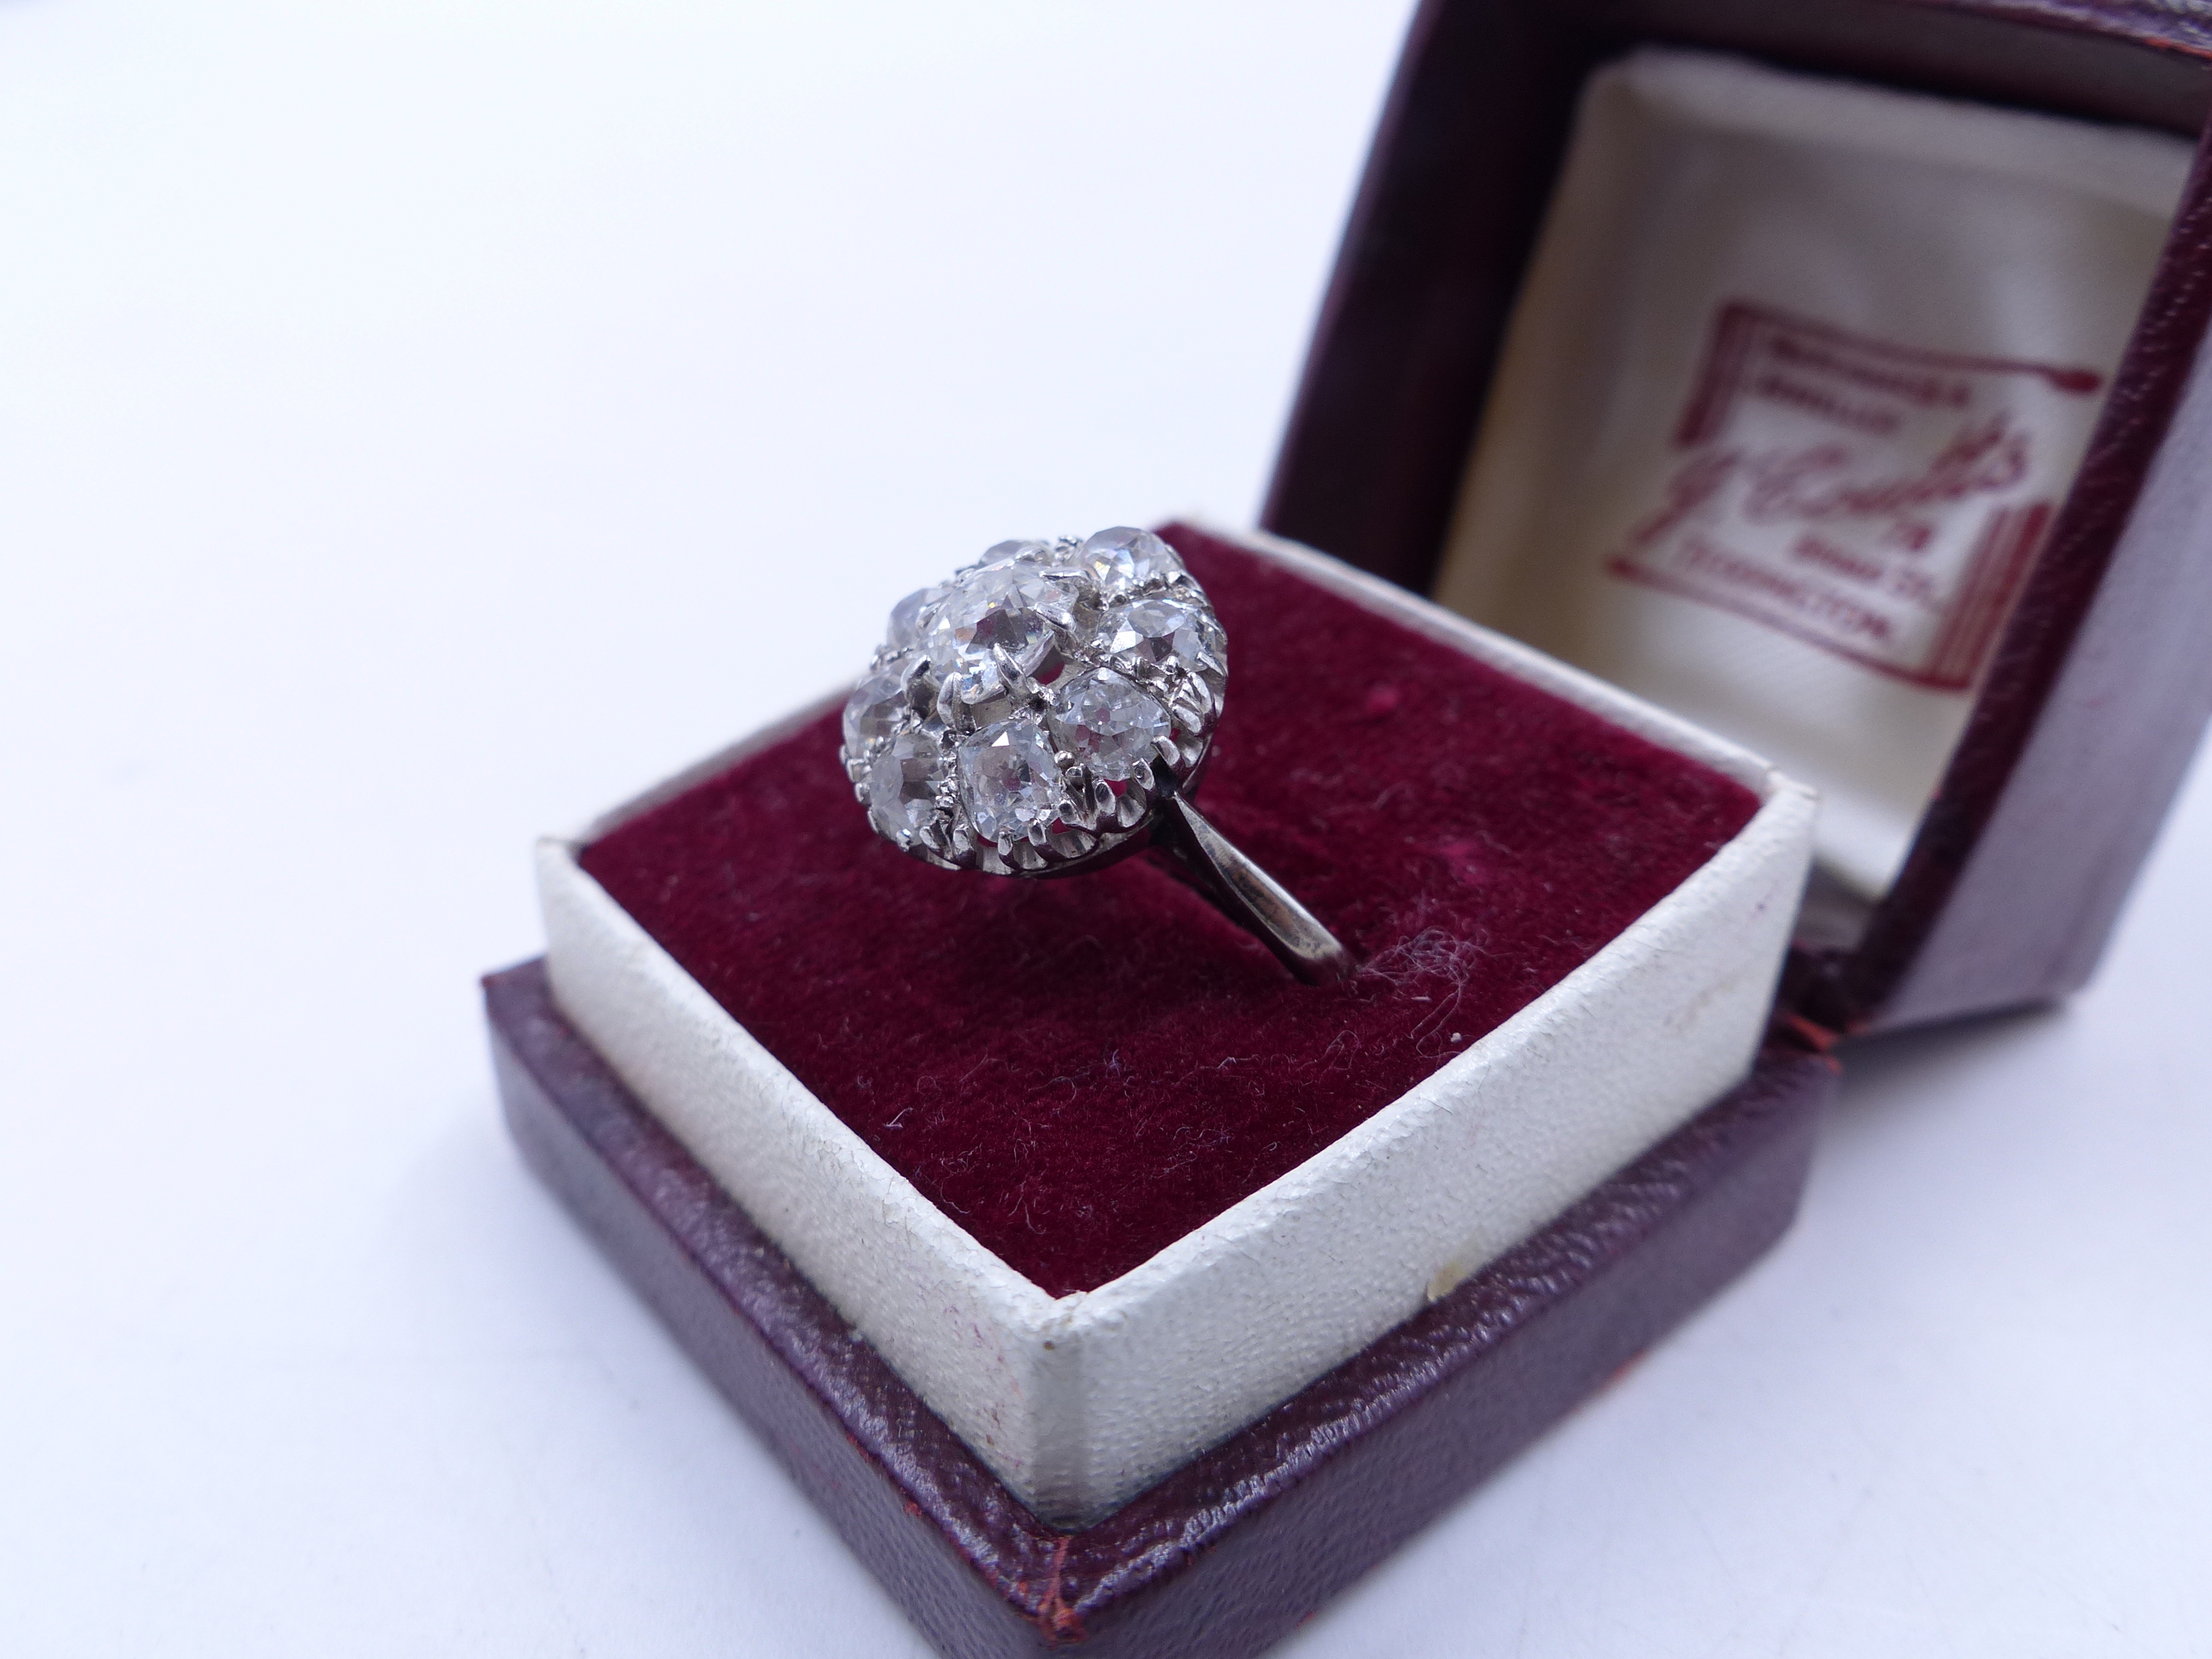 AN OLD CUT DIAMOND CLUSTER RING IN A WHITE METAL SETTING (TESTED AS WHITE GOLD). THE CENTRAL DIAMOND